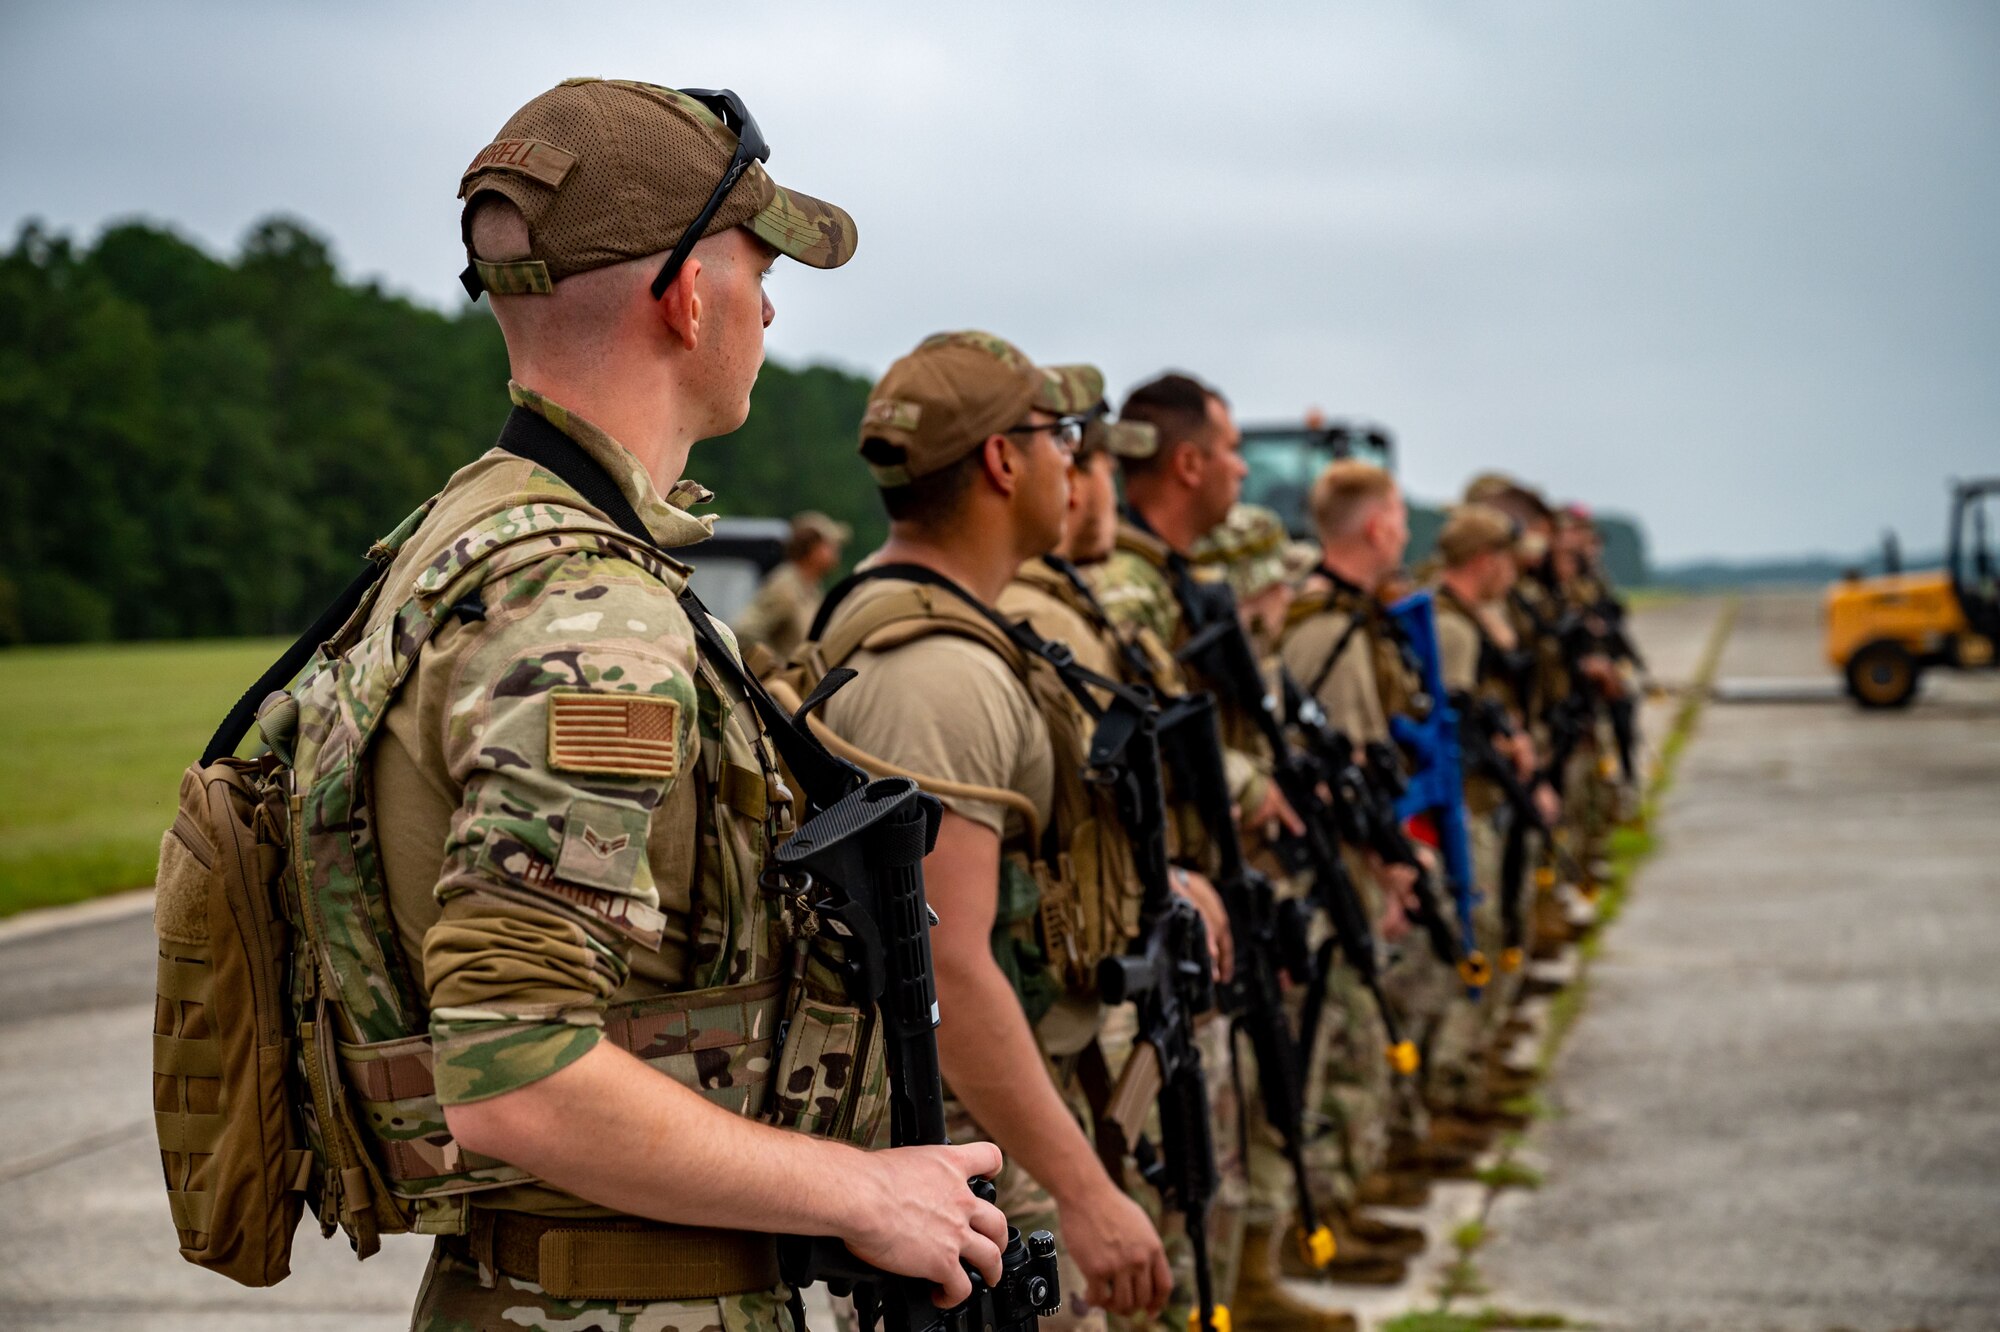 A photo of Airmen standing in a line holding weapons.